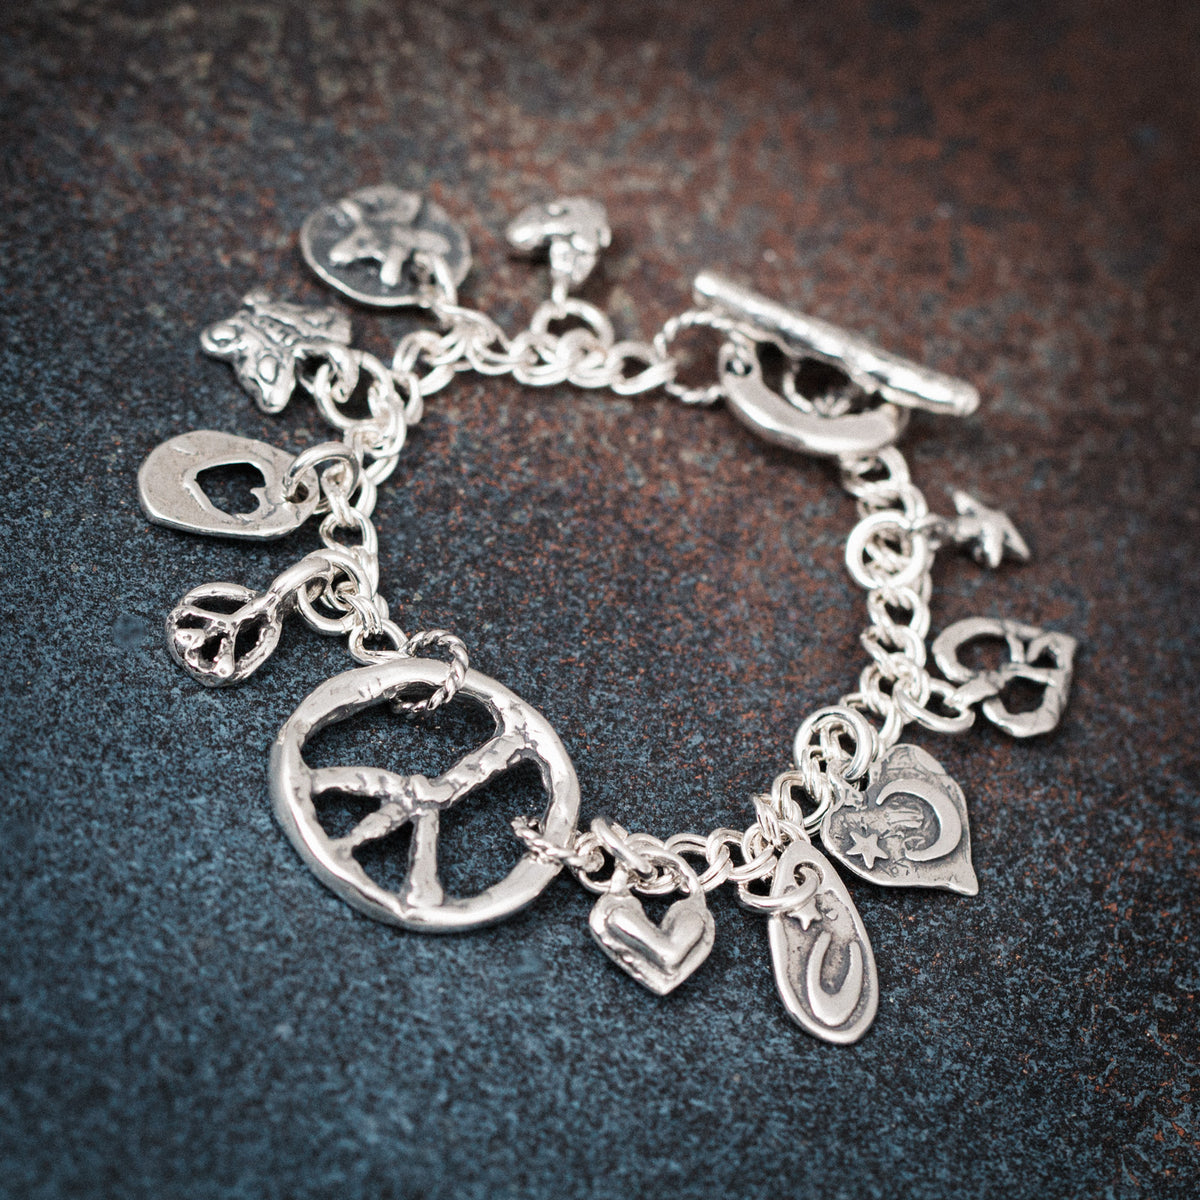 charm bracelet with peace signs and hearts